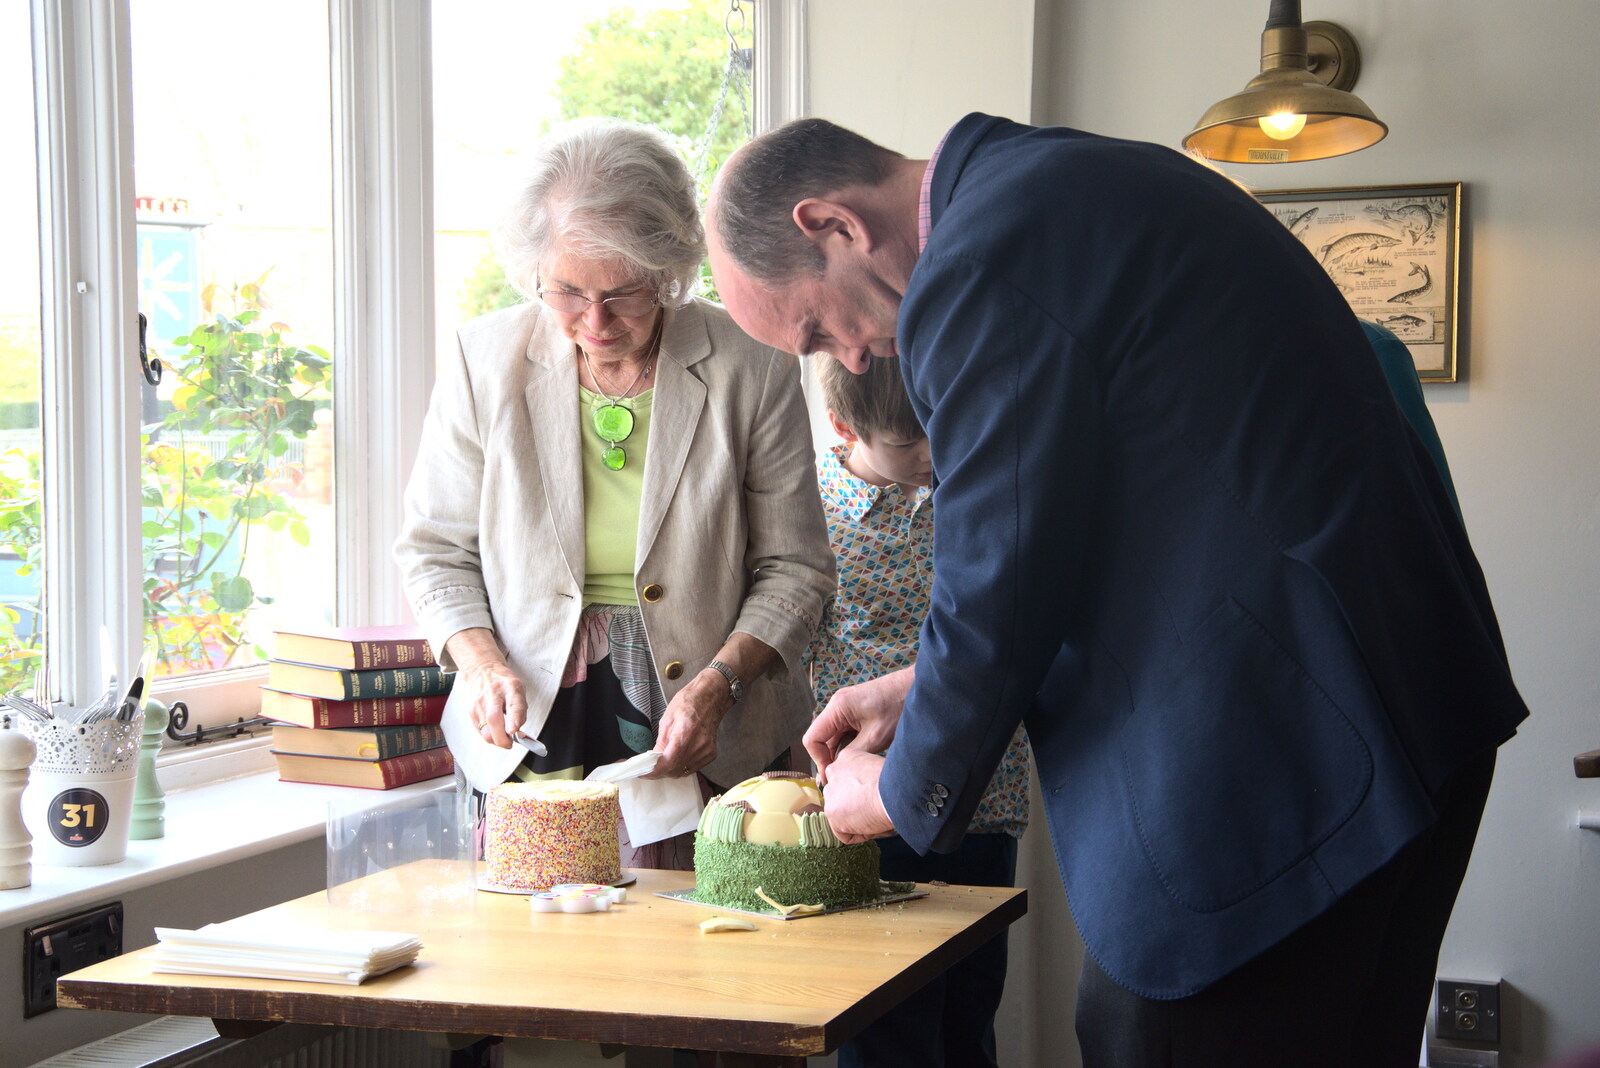 Bernice's Birthday and Walks Around New Milton and Lymington, Hampshire - 10th April 2022: Bernice and Phil sort out some cake slicing